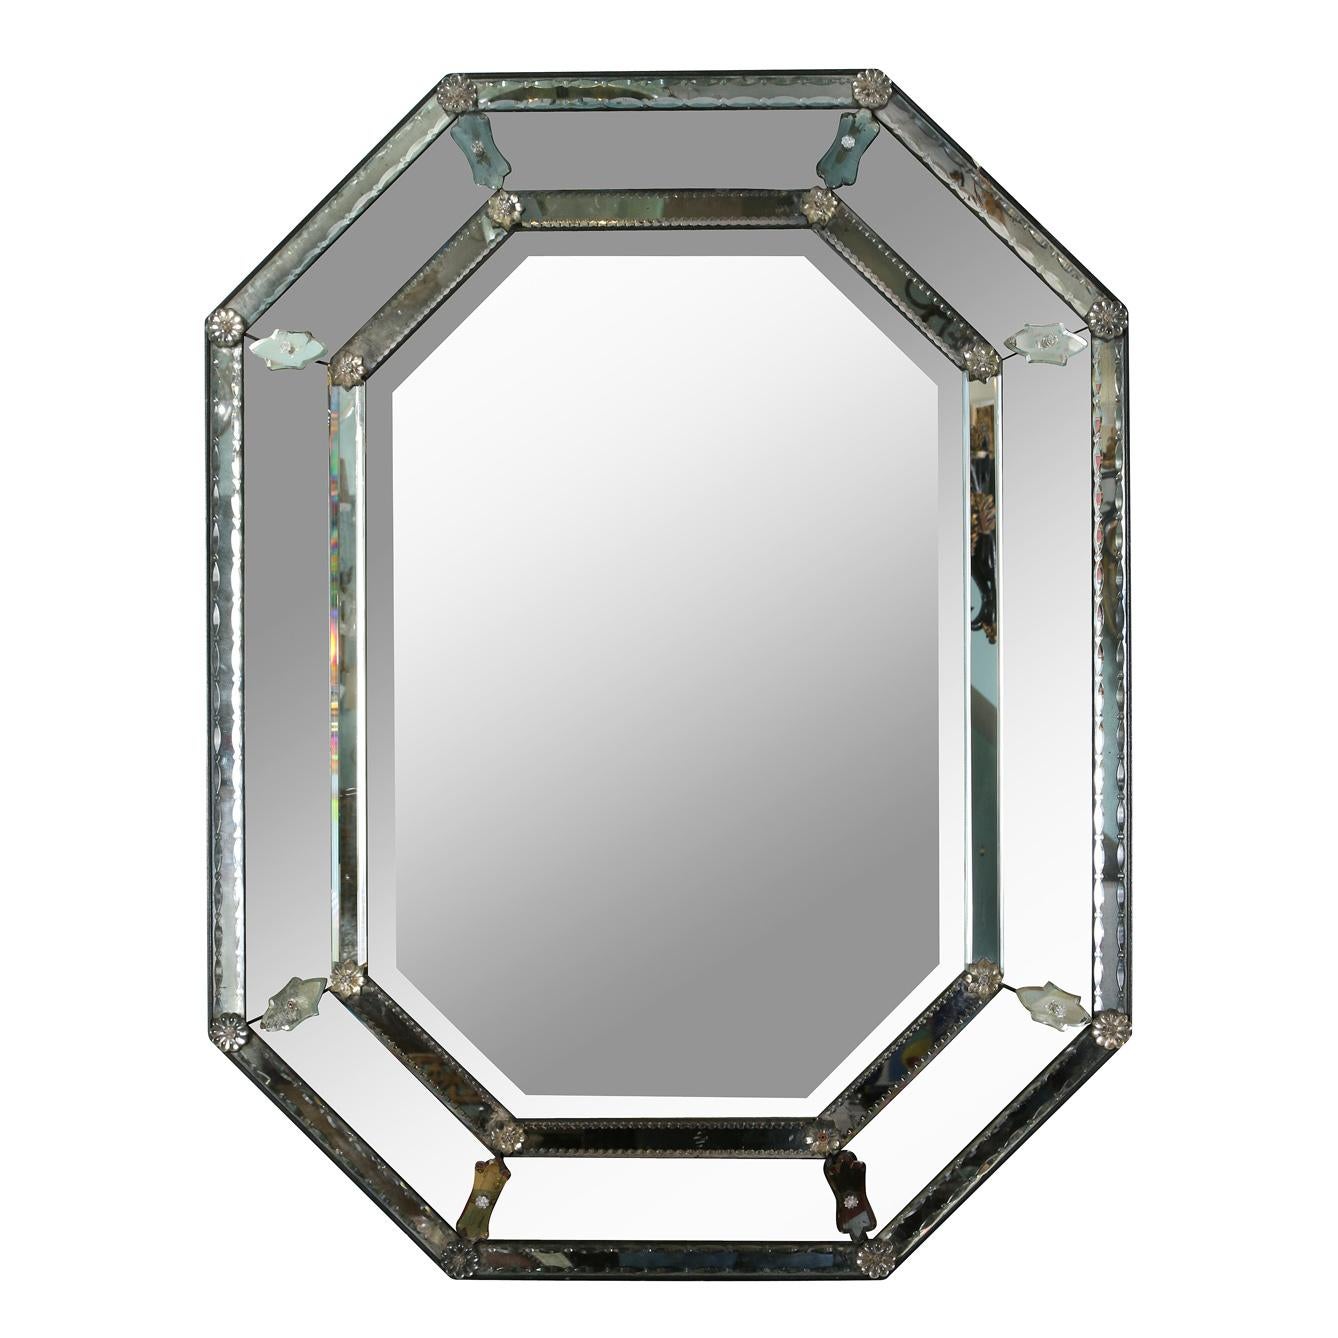 A vintage octagonal faceted Venetian mirror with two beautiful bands of detailed mirrored plates that sparkle with an intricate patterned edge on each band. The double band surrounds angled mirrored plates with foliate details at each corner and a